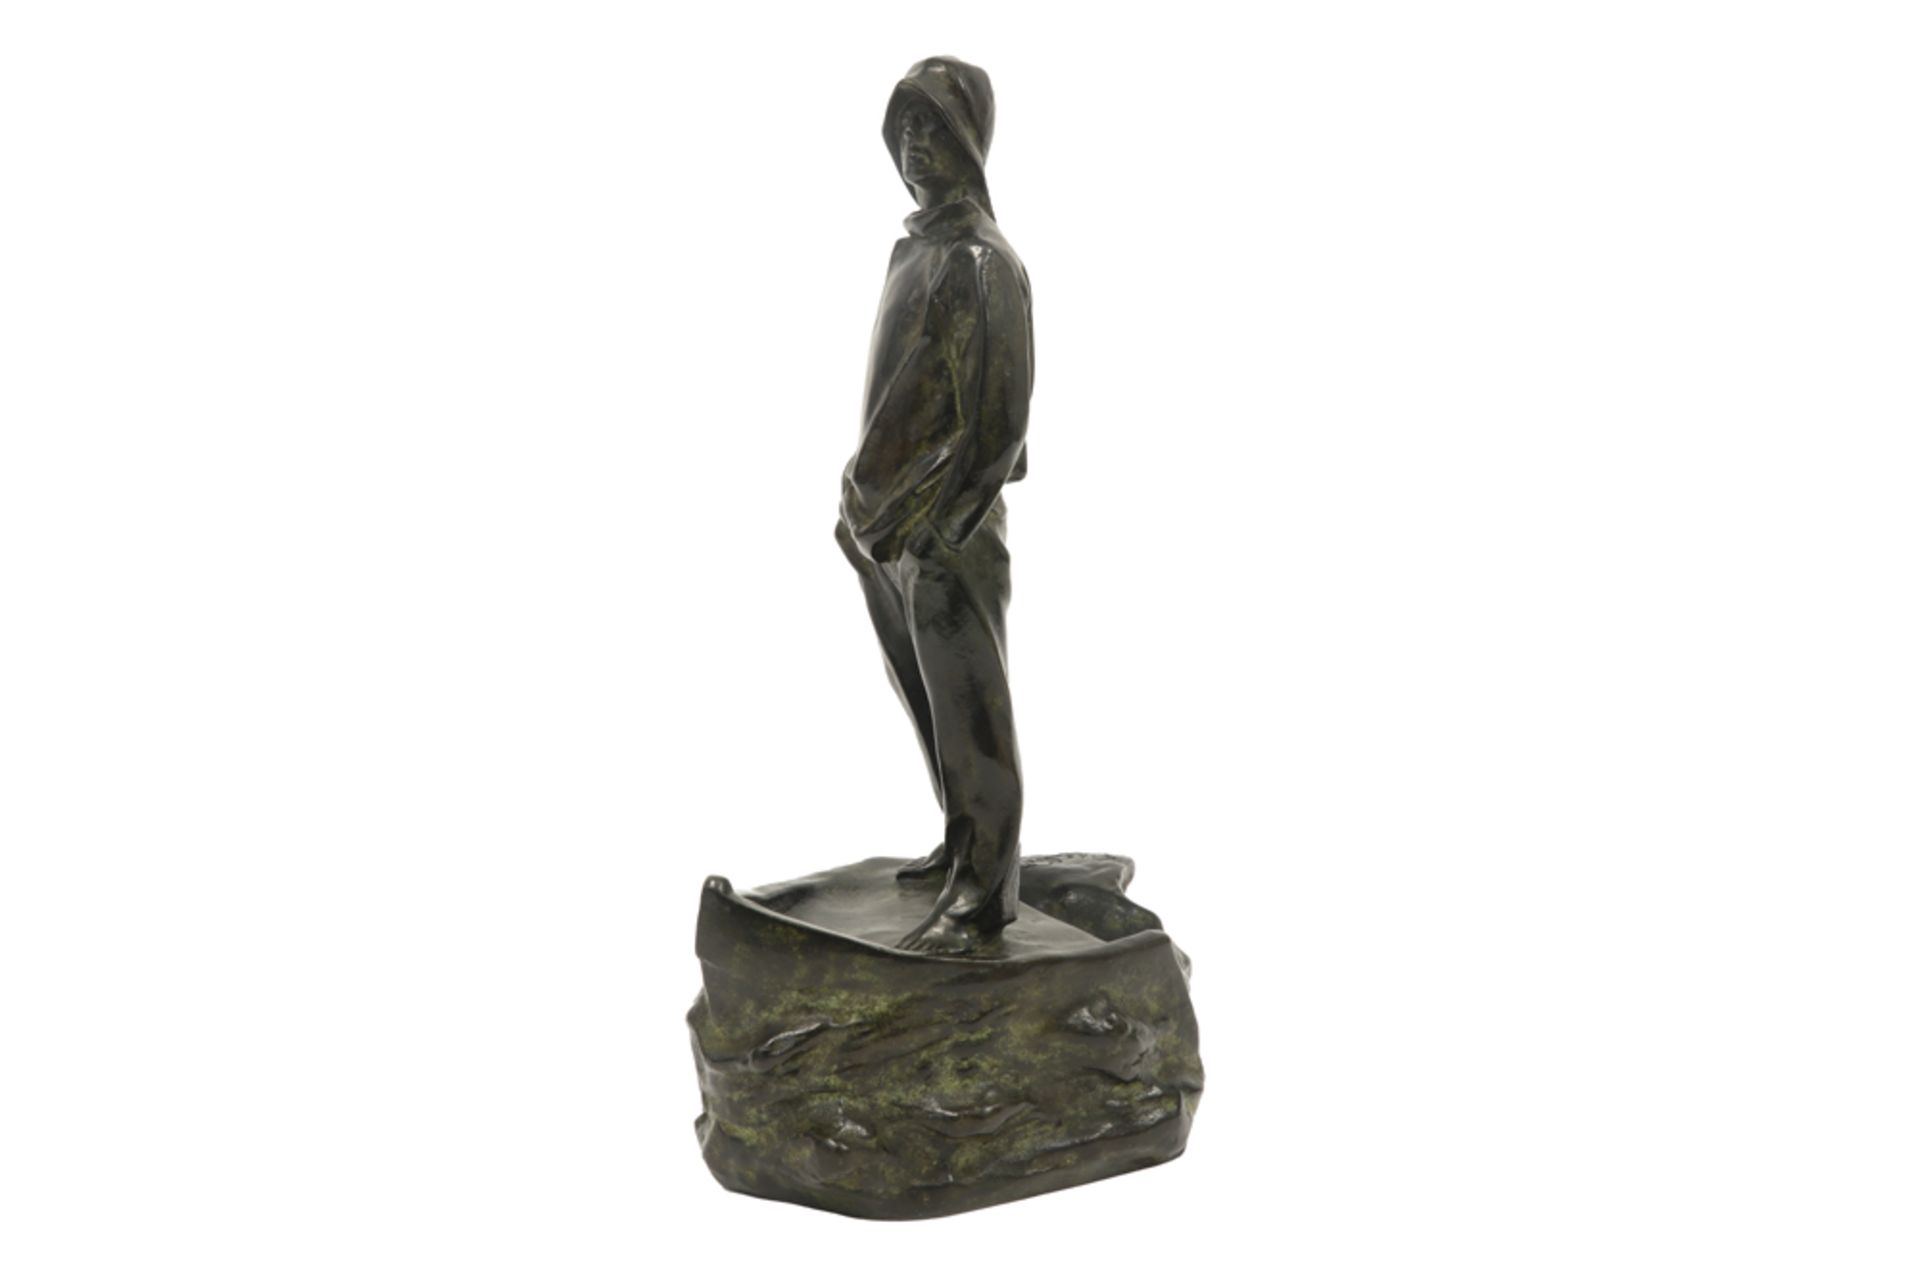 early 20th Cent. "Fisherman" sculpture in bronze - signed Pierre de Soete the big version of this - Image 2 of 5